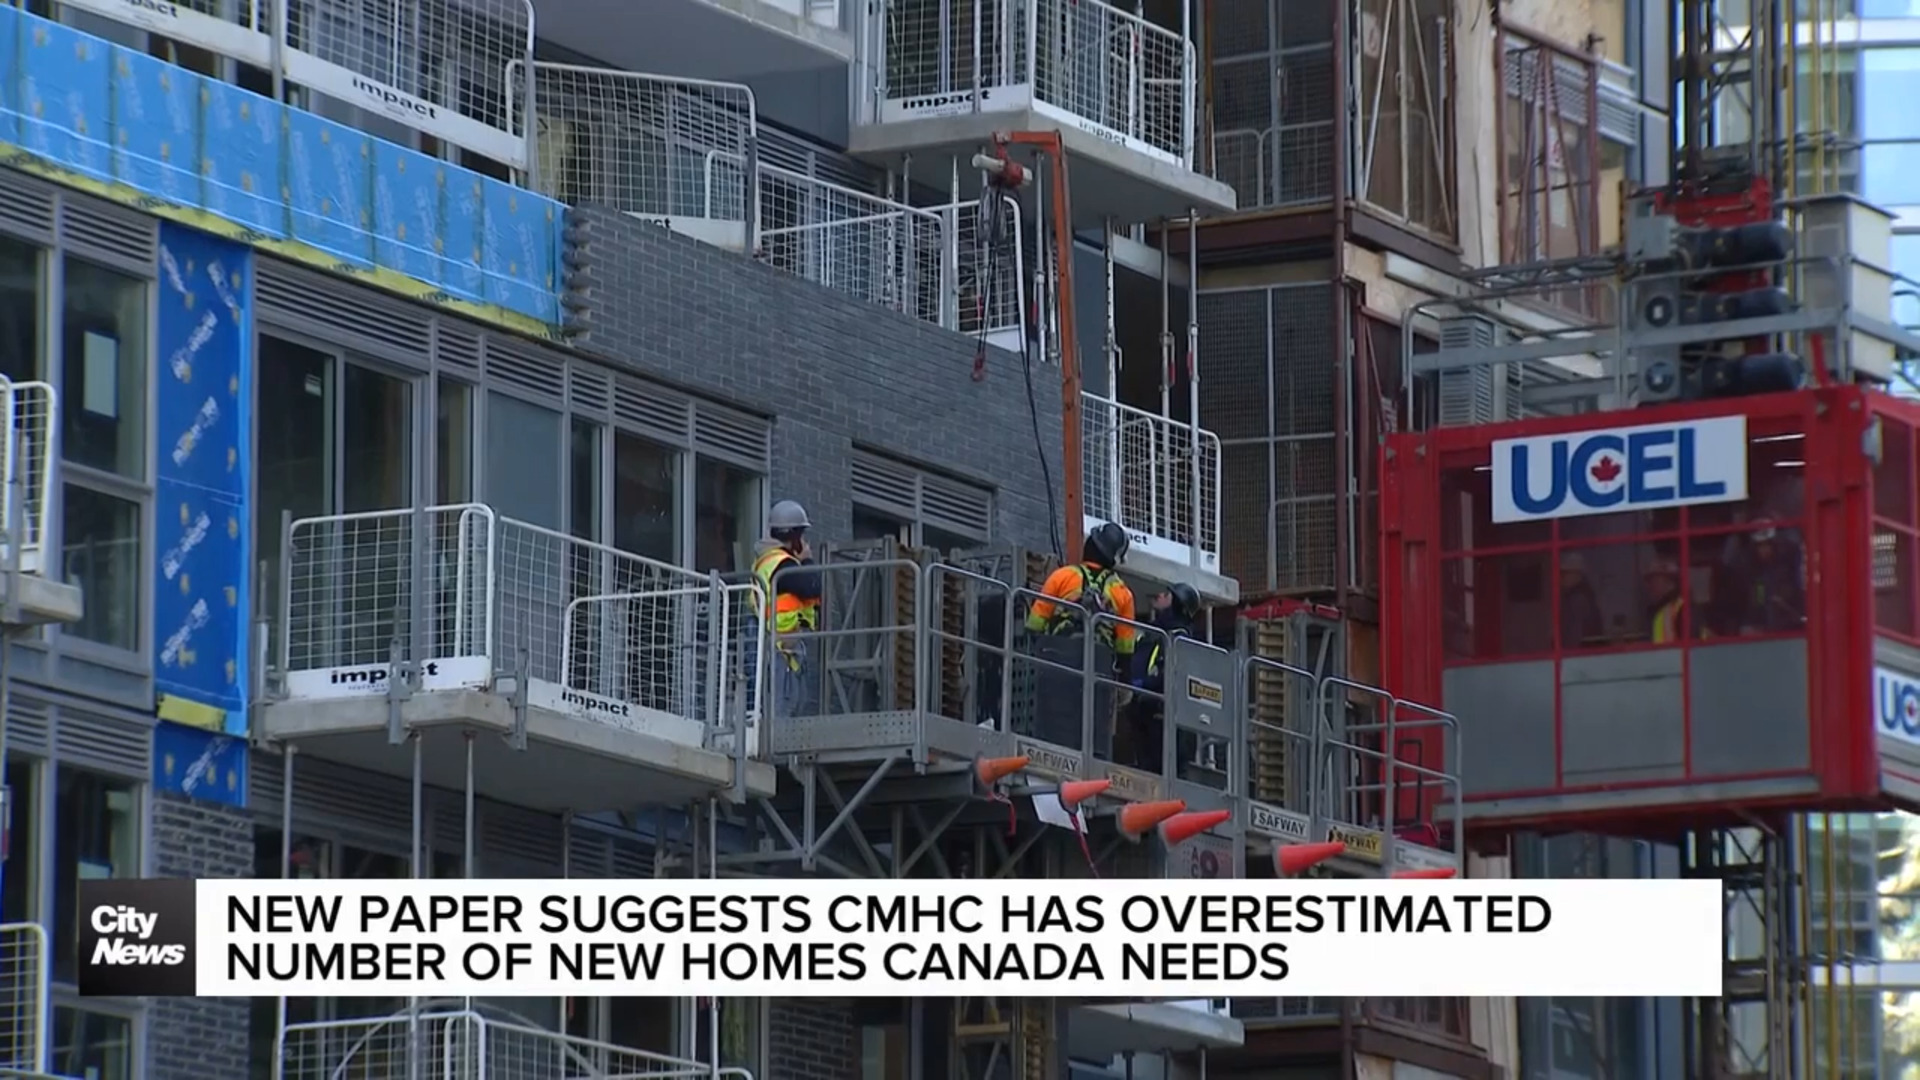 Does Canada's housing market face an oversupply risk?